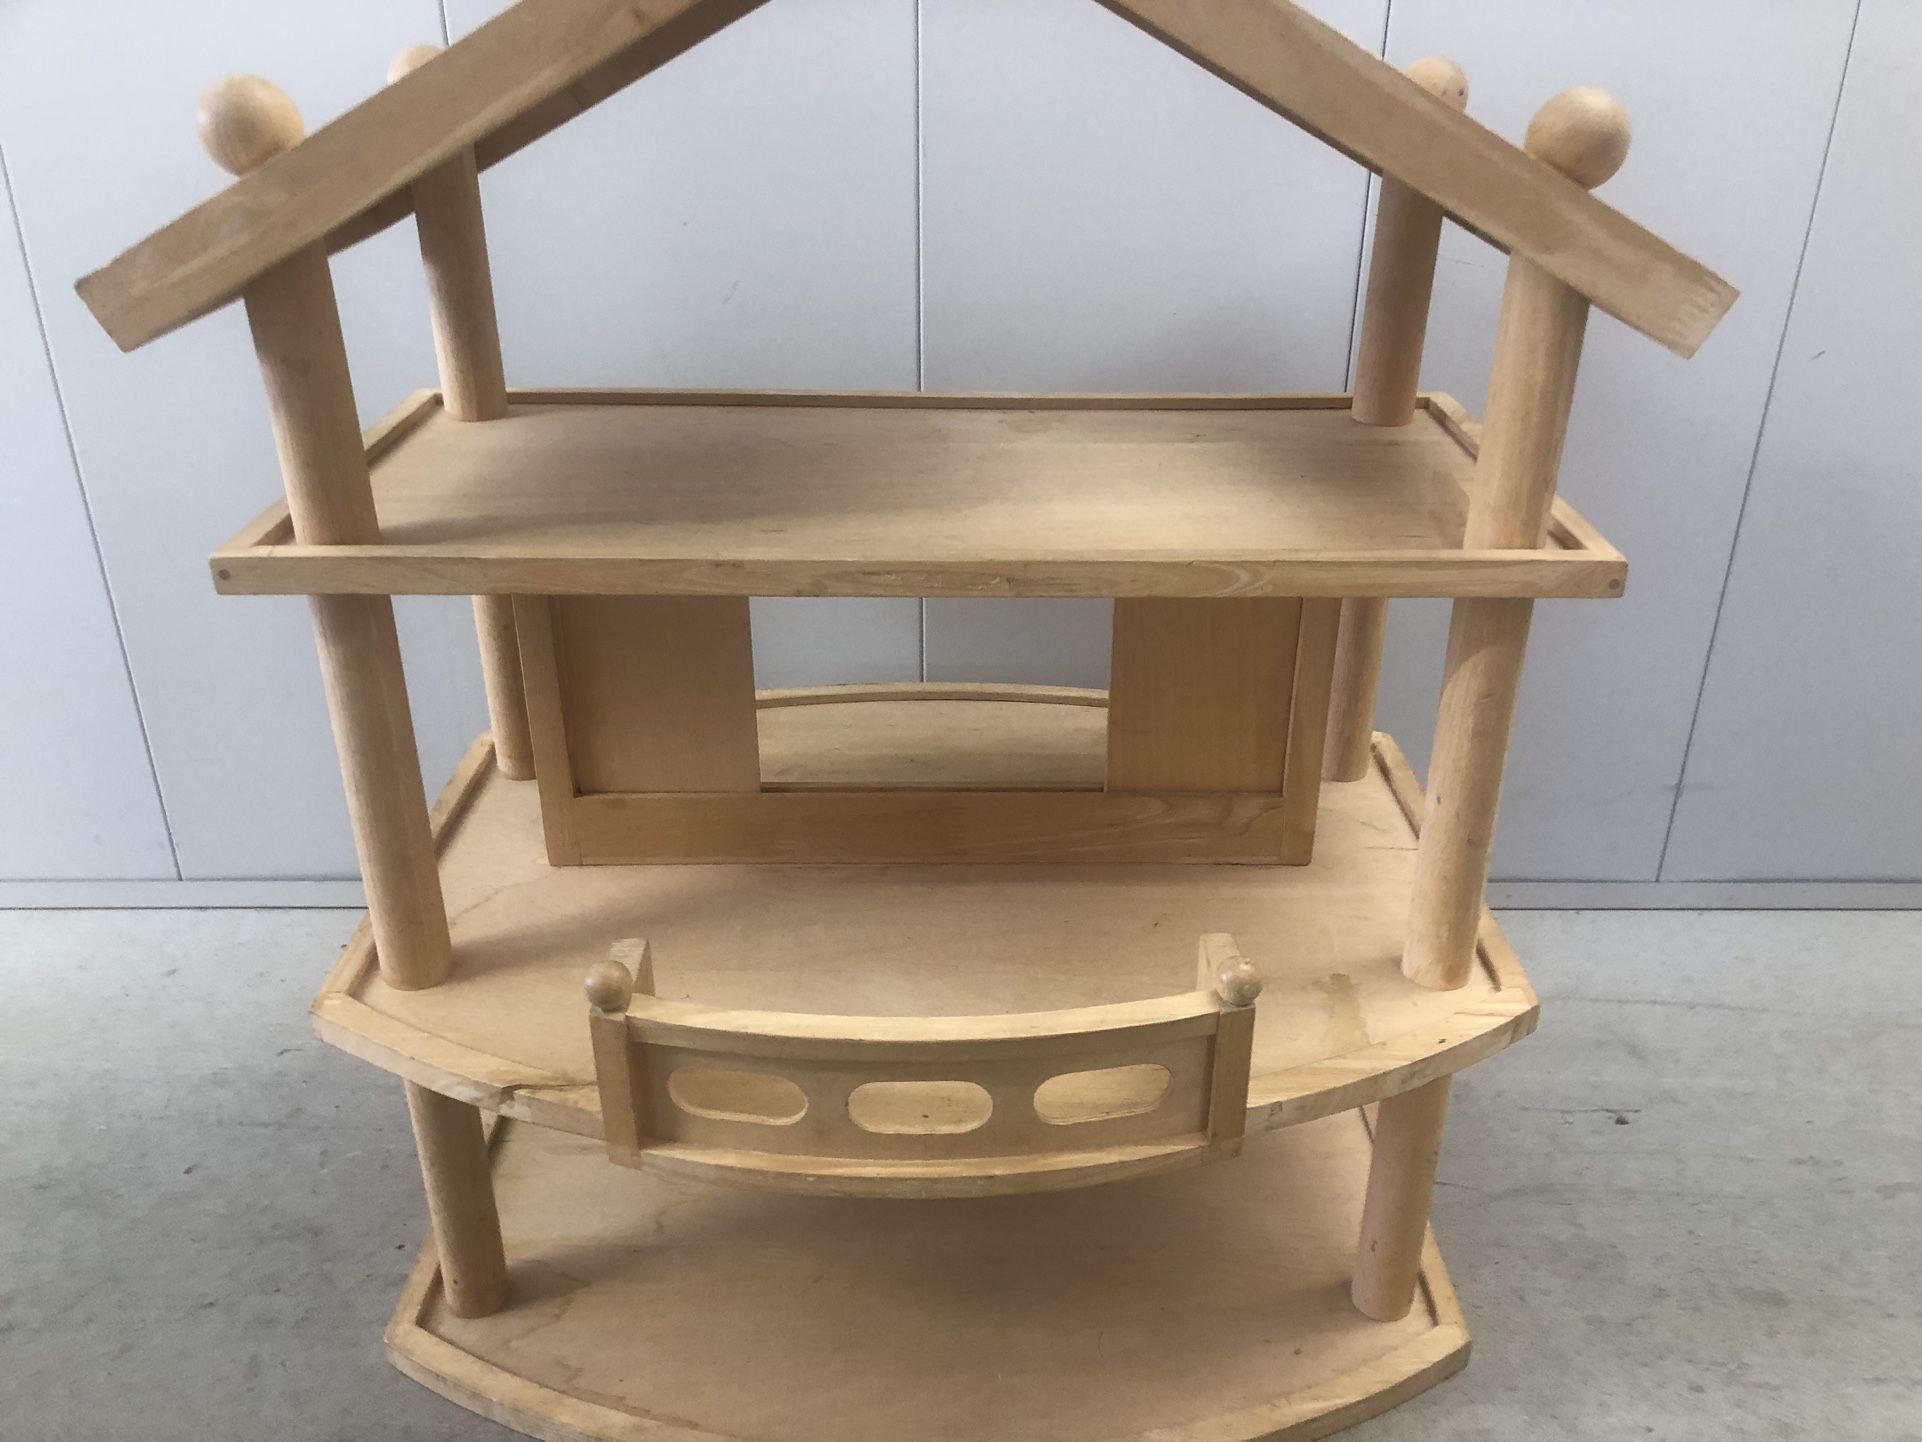 wooden Doll House (3ft Tall)